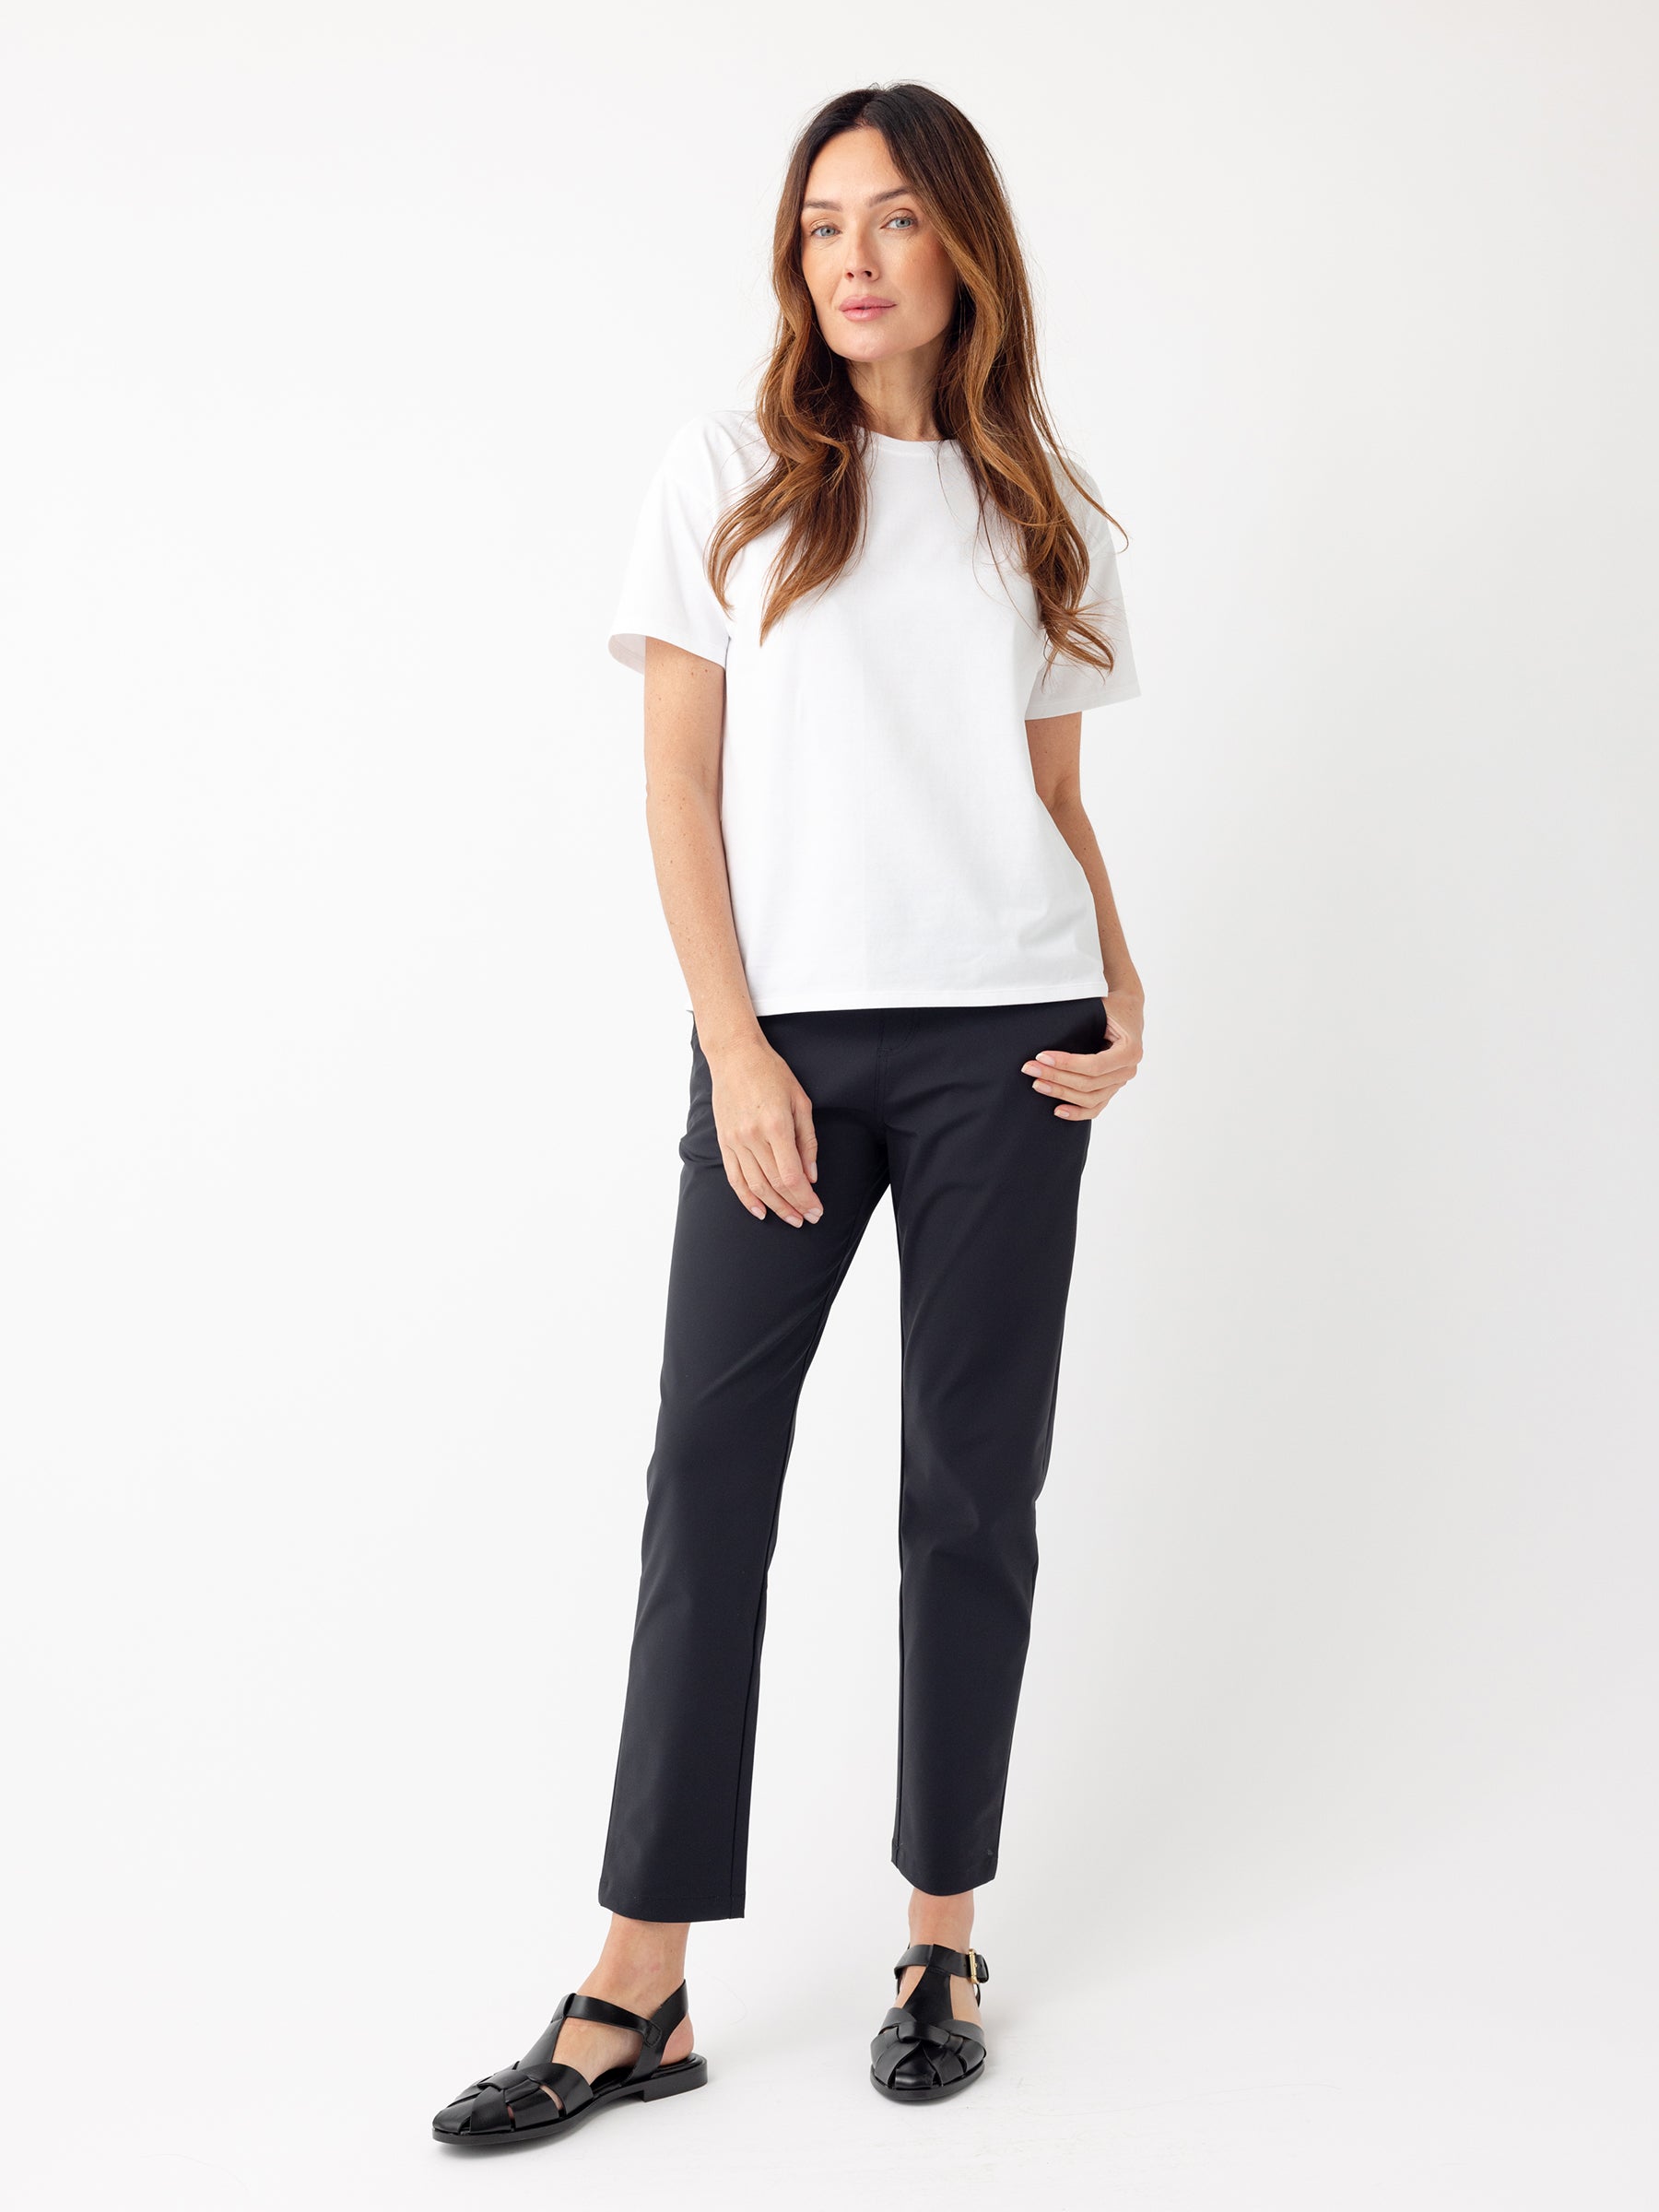 Against a plain white backdrop stands a woman with long, wavy brown hair. She is dressed in a white short-sleeve t-shirt and the Women's Always Cropped Pant from Cozy Earth in black. Completing her outfit are black flat shoes. Her right hand rests on her hip, and she gazes slightly to the left. |Color:Jet Black